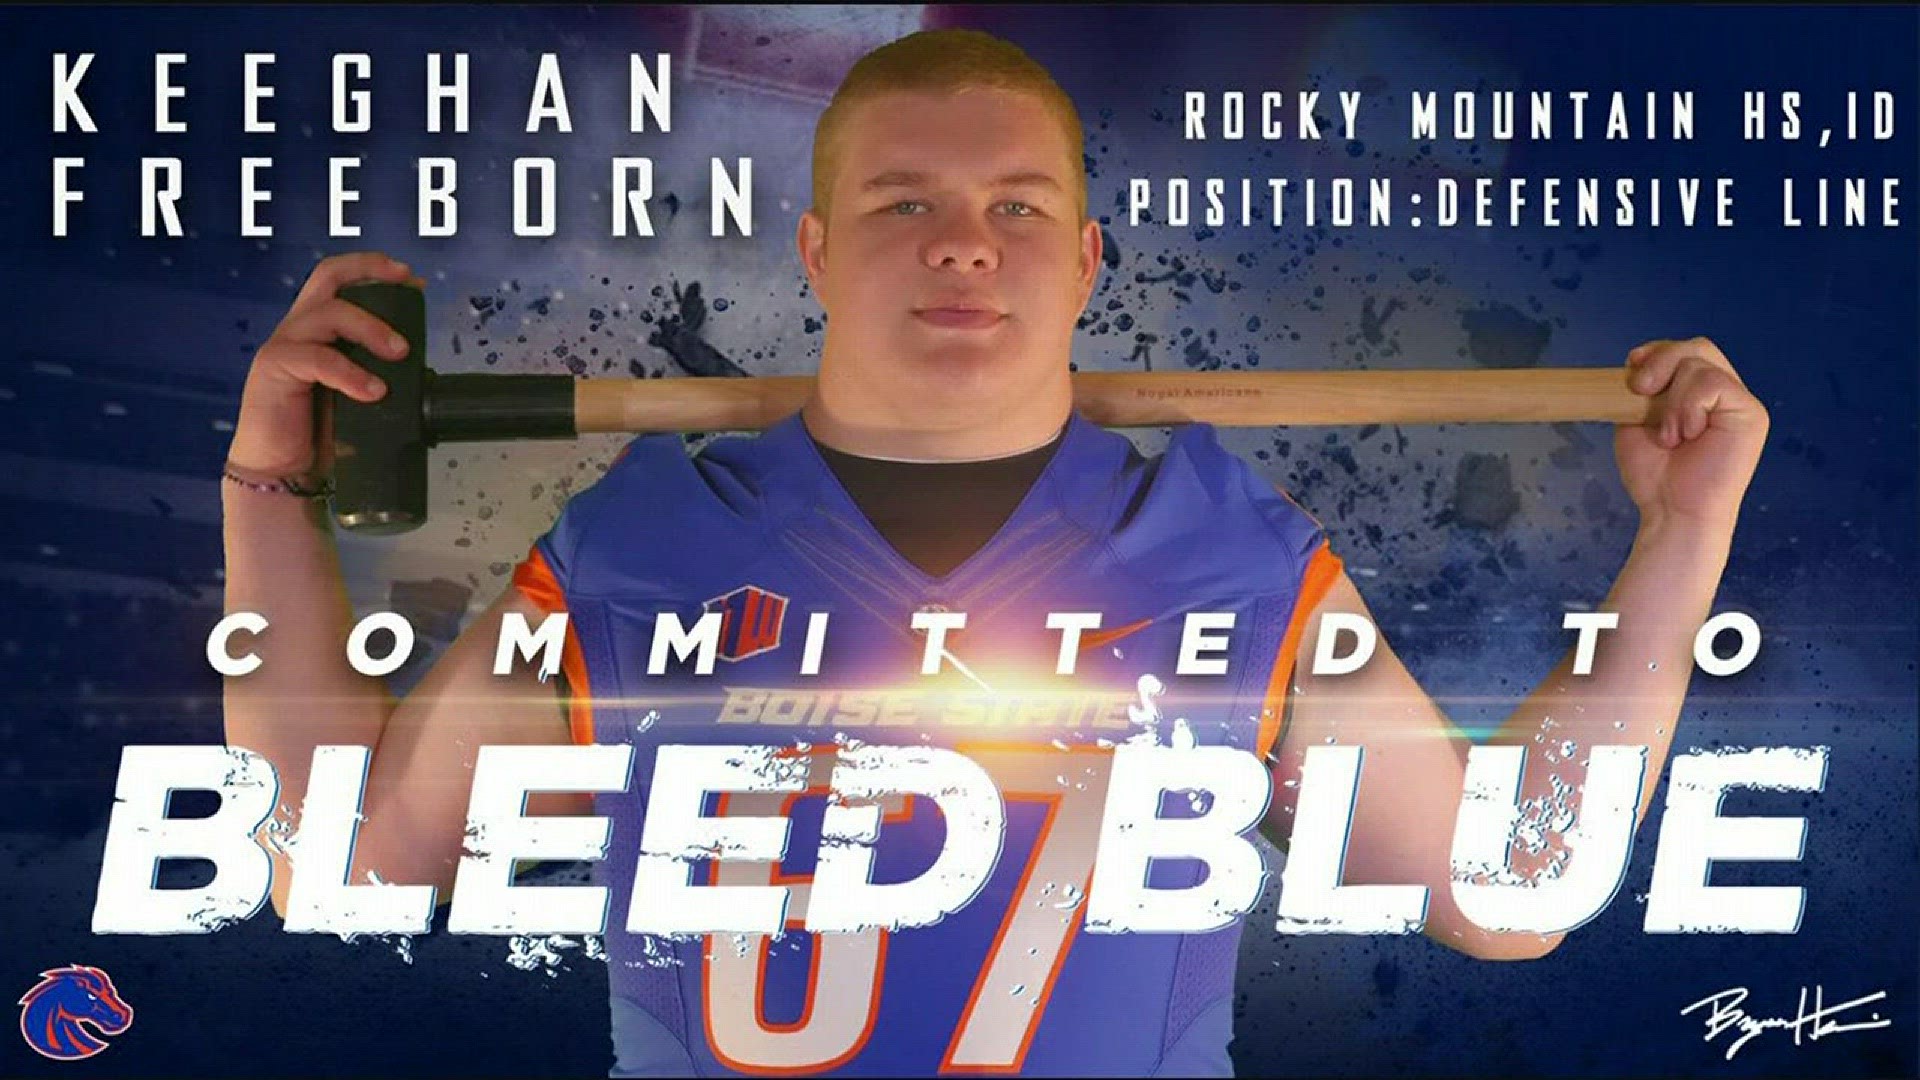 RMHS nose guard Keeghan Freeborn committed to Boise State football Thursday.